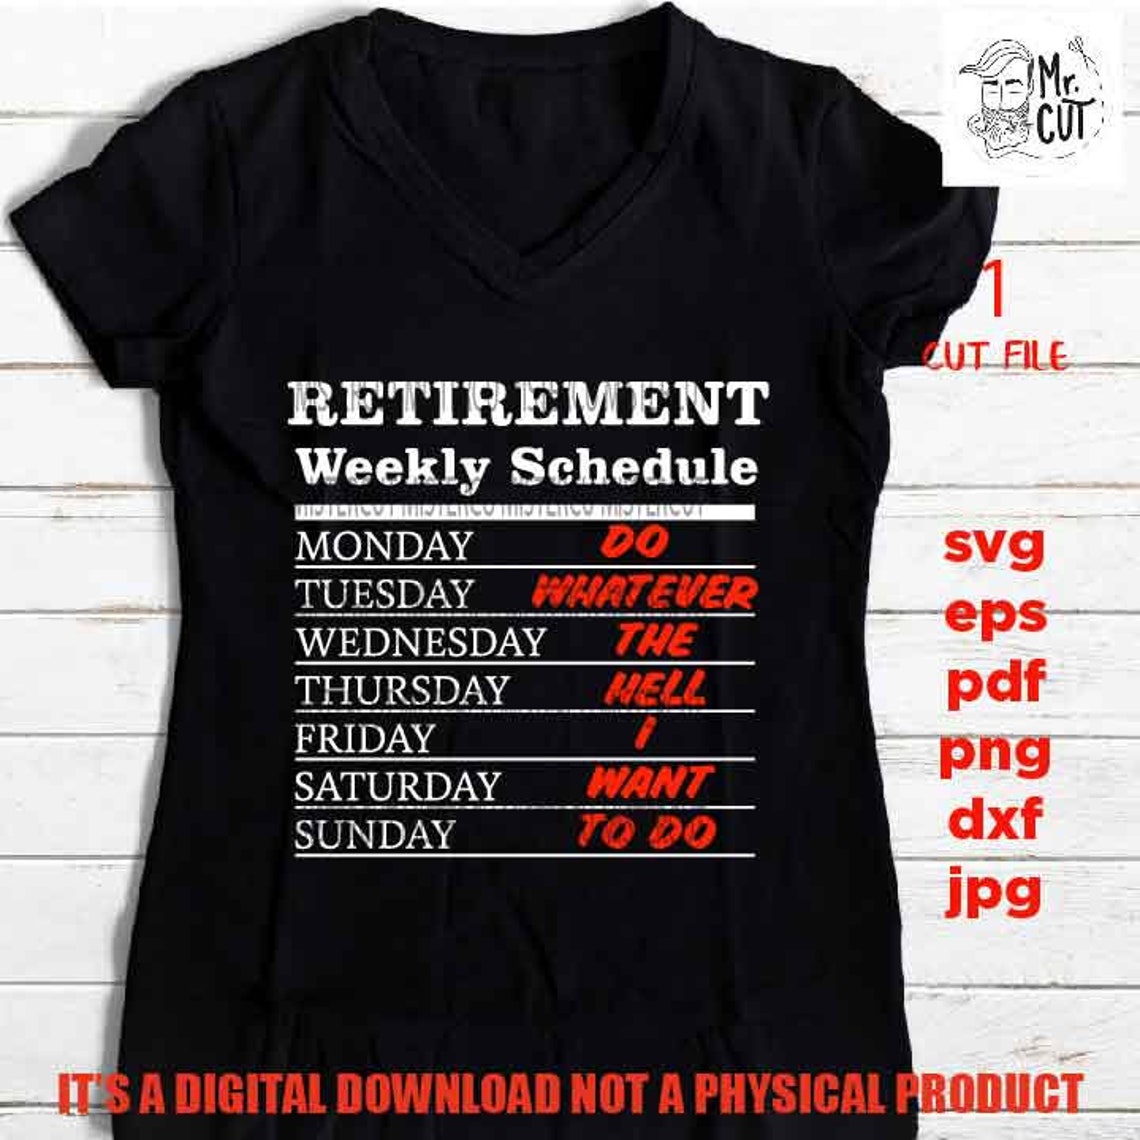 Retirement Weekly Schedule Svg Dxf Jpg Png High Resolution | Etsy Hong Kong